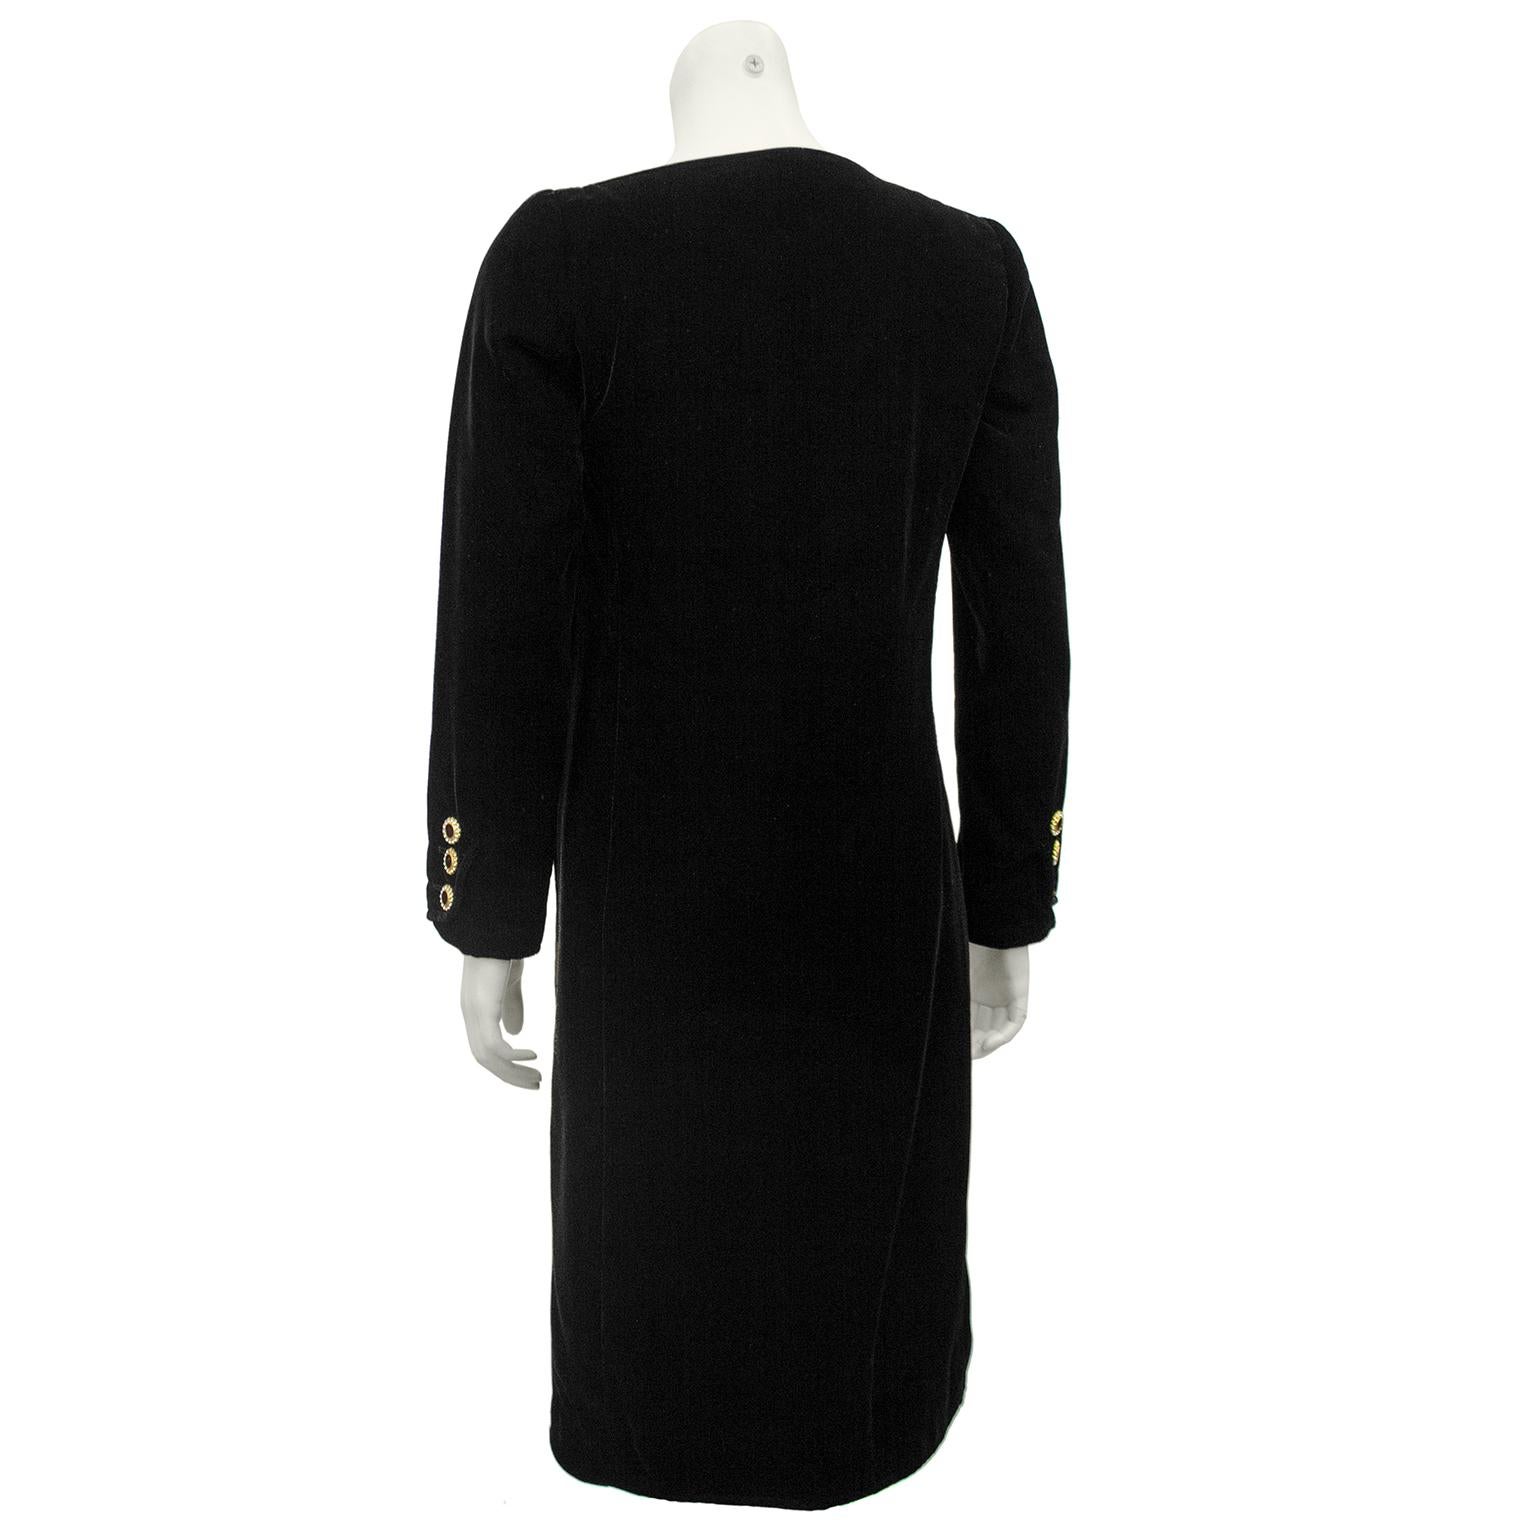 1980s Yves Saint Laurent/YSL Black Cocktail Dress In Good Condition For Sale In Toronto, Ontario